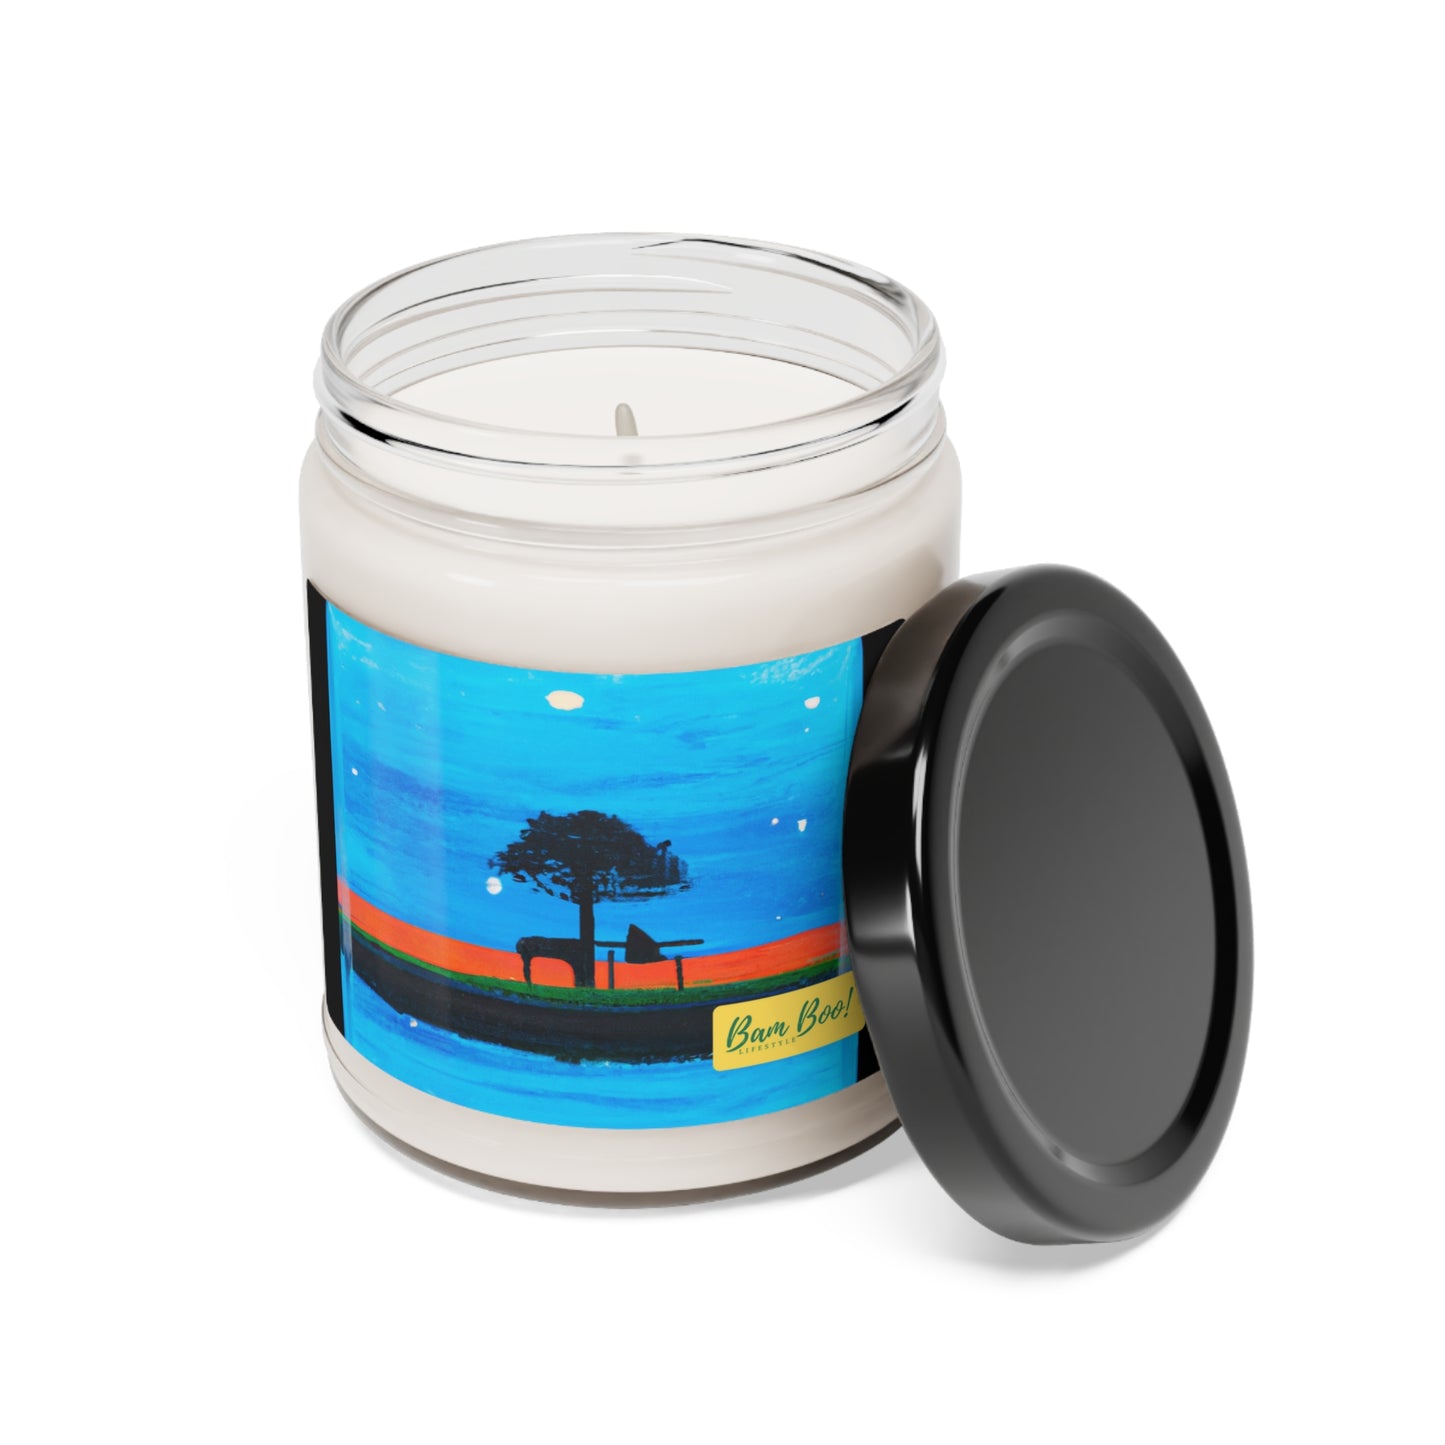 "Transformation's Beauty: Ordinary to Extraordinary" - Bam Boo! Lifestyle Eco-friendly Soy Candle